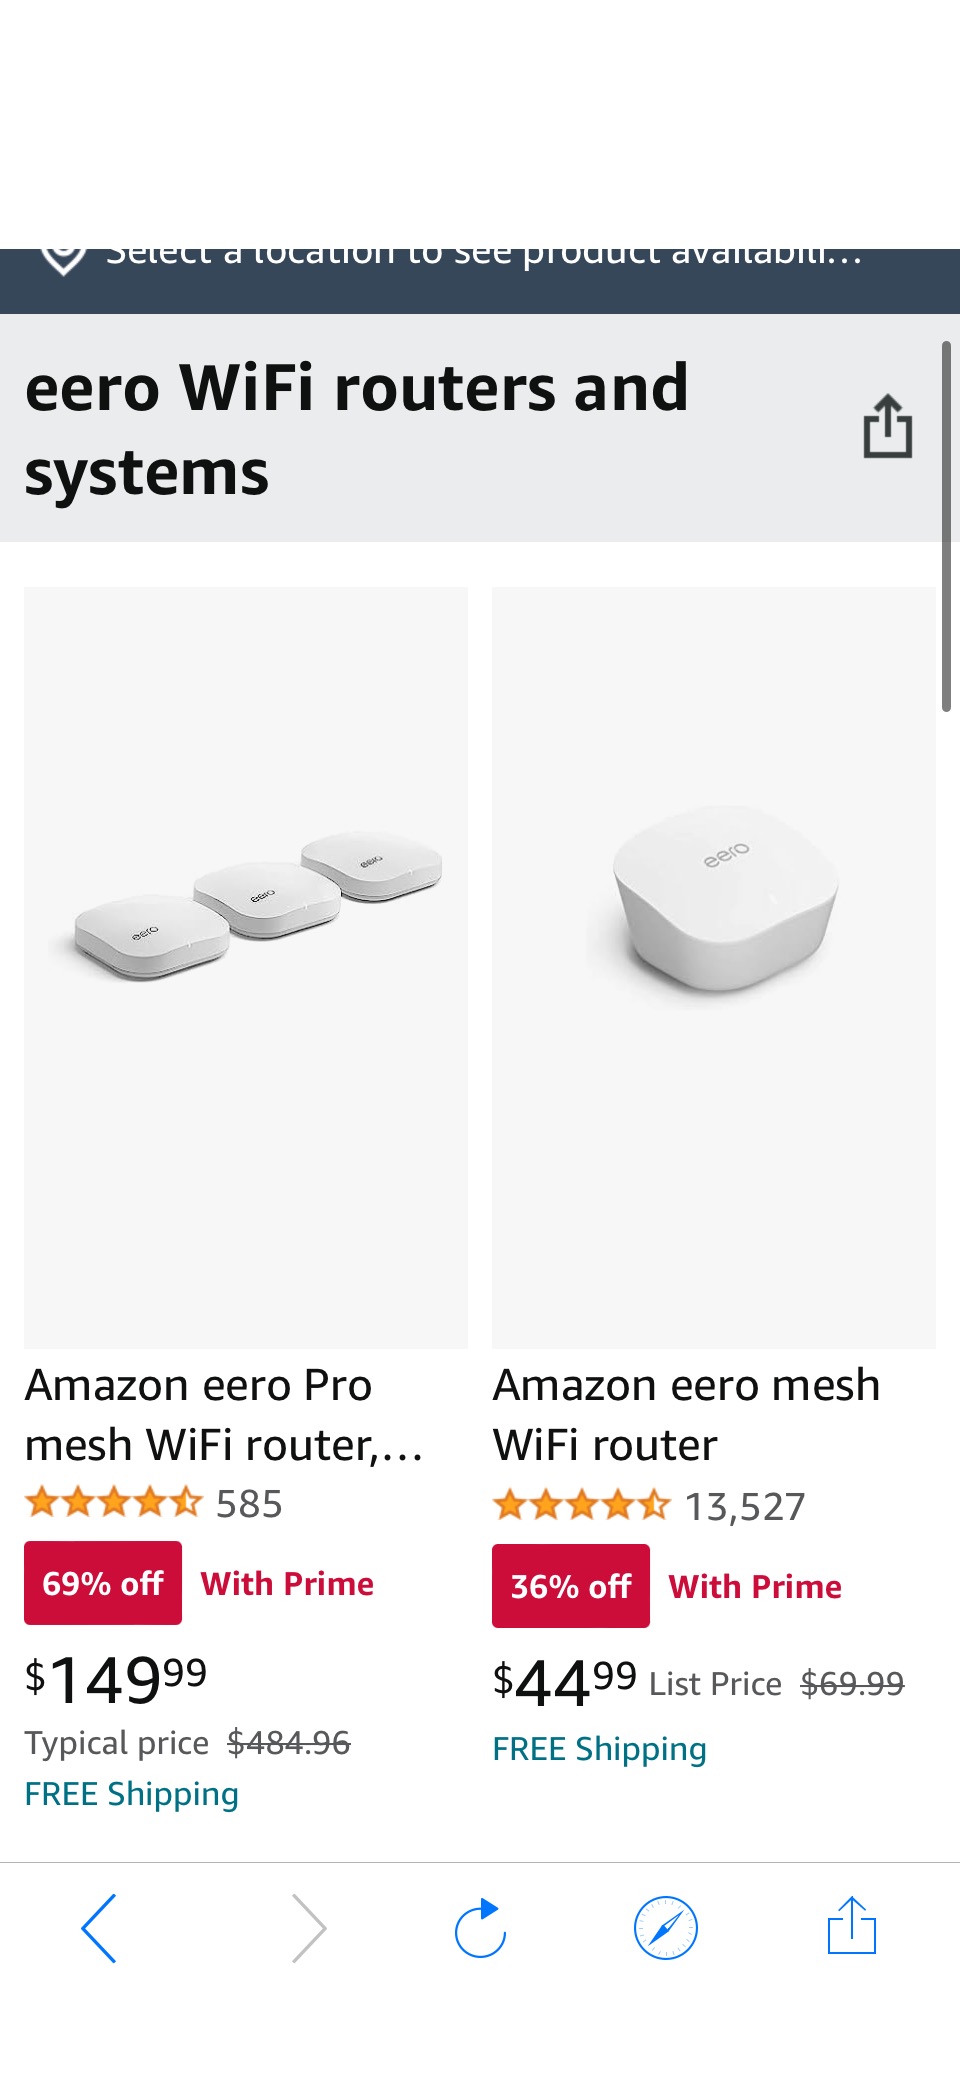 eero WiFi routers and systems促销44.99起